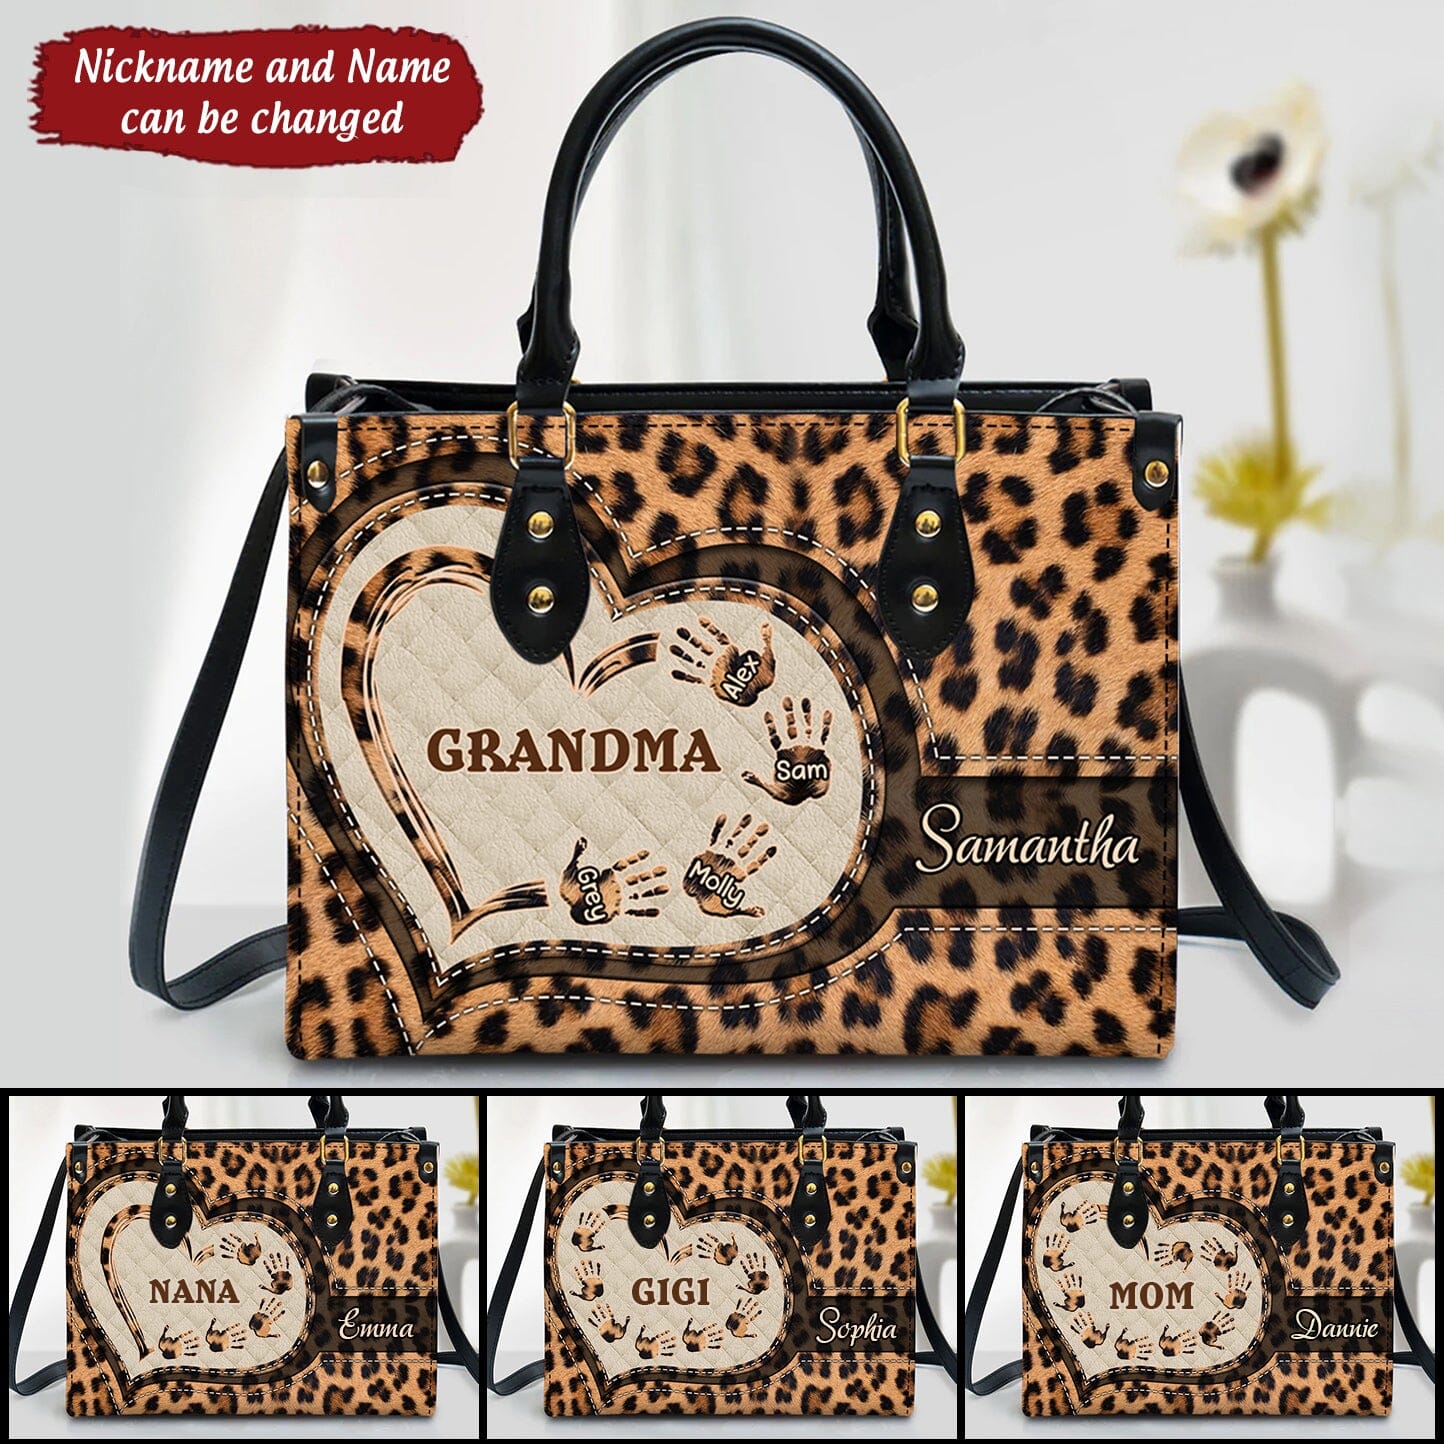 Customized Grandma Mom Heart Hand Prints Leopard Seamless Mothers Day Familia Gift Leather Handbag HLD01AUG22TT2 Leather Handbag Humancustom - Unique Personalized Gifts 